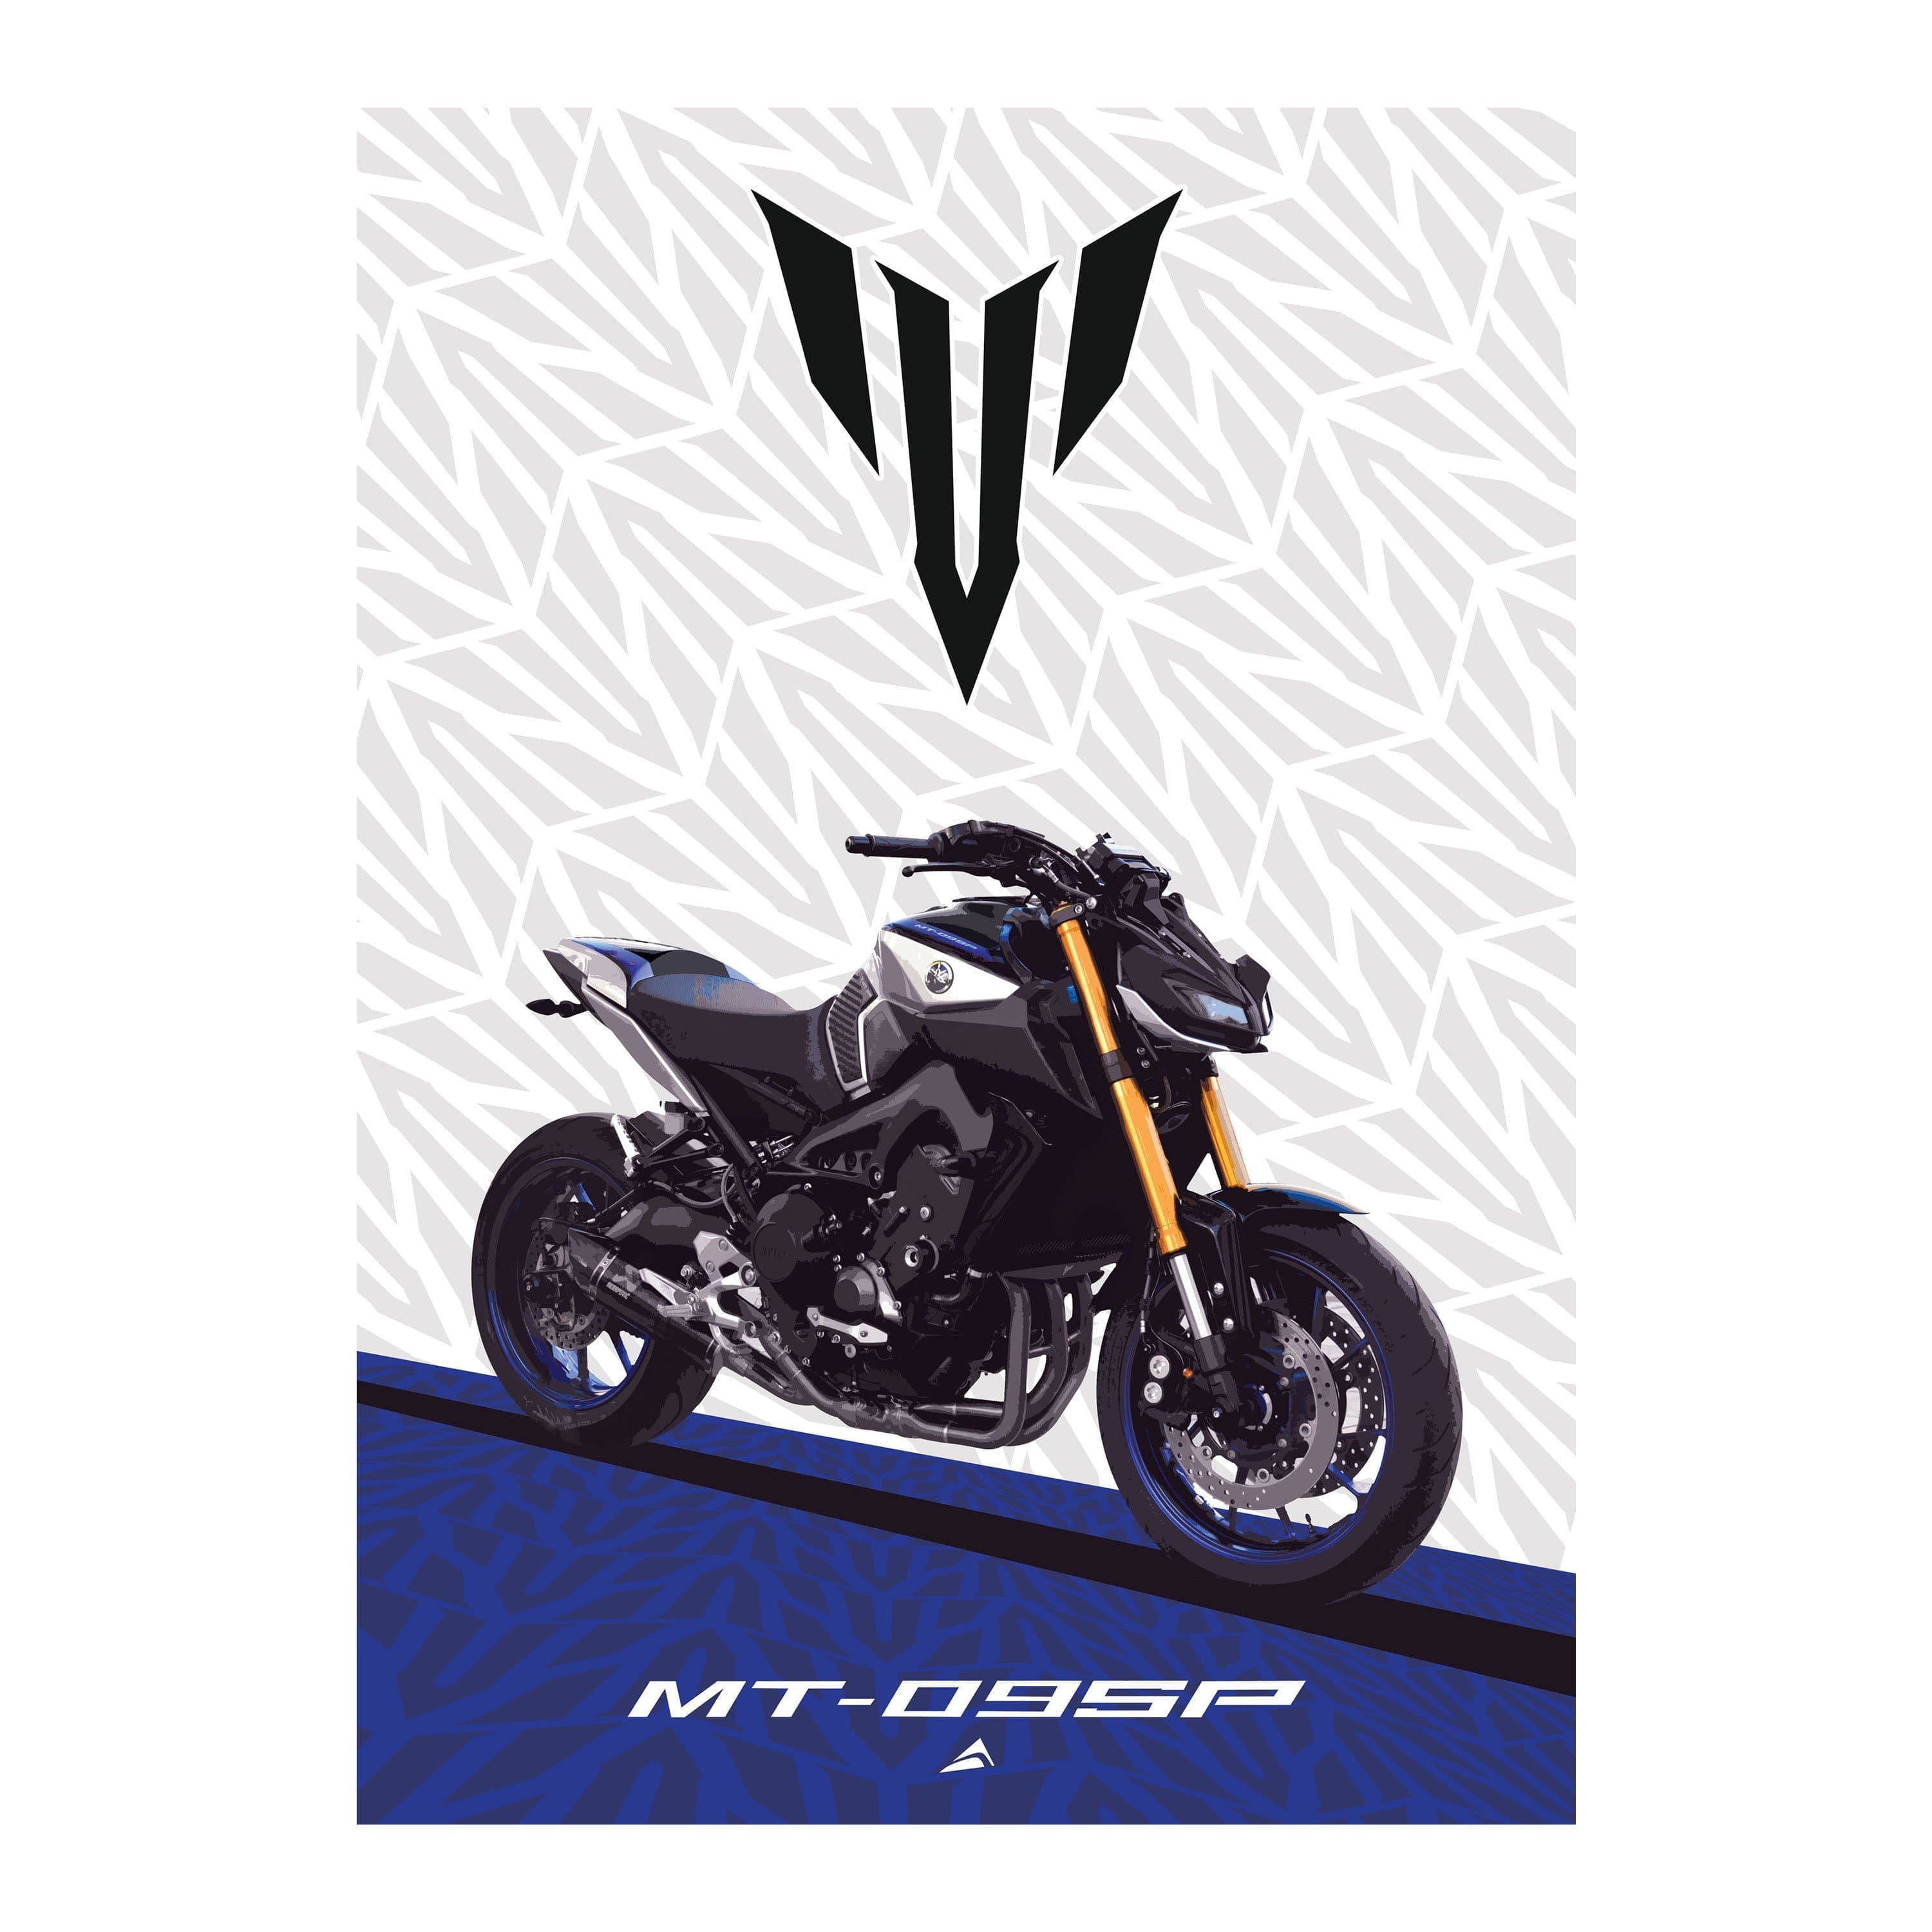 Pyramid MT-09 SP Poster | Yamaha MT-09 SP 2017>2020-MP200-Merchandise-Pyramid Motorcycle Accessories